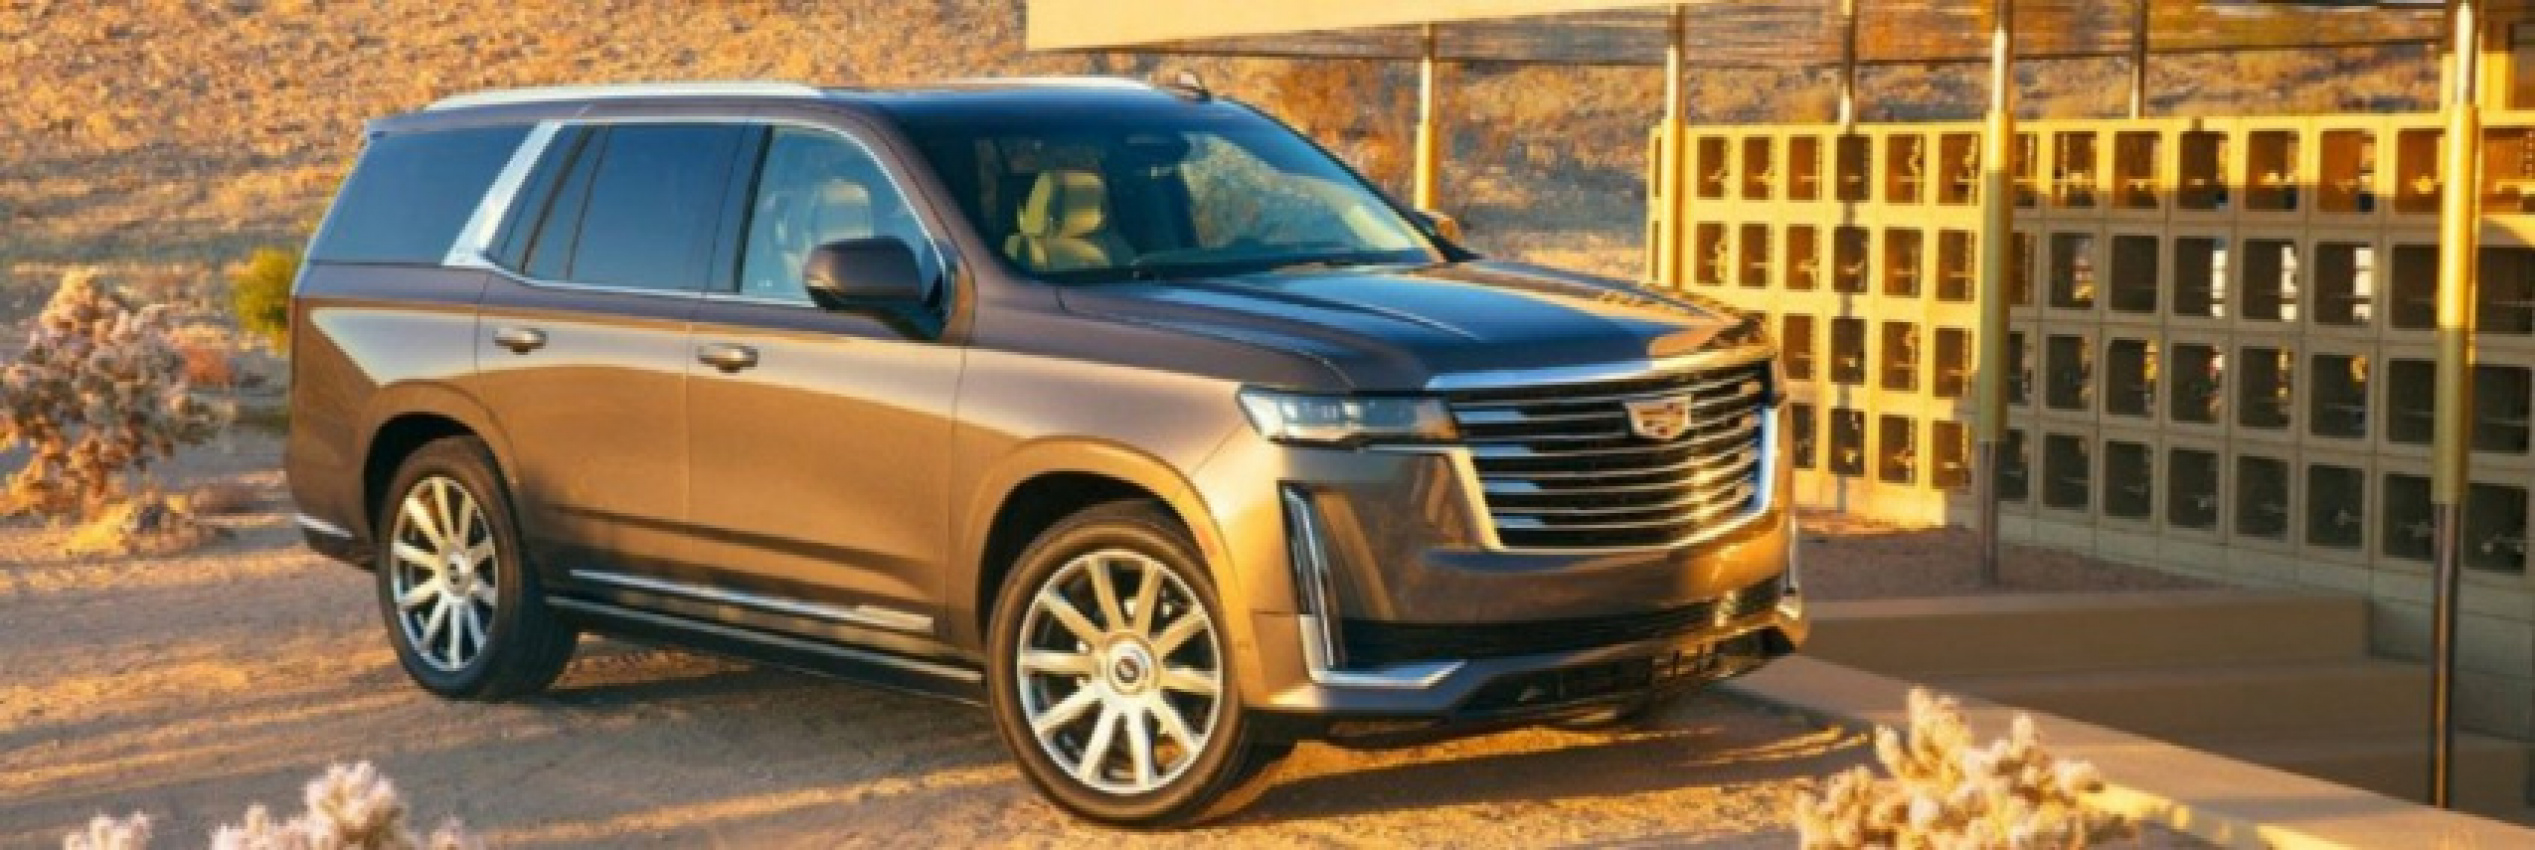 autos, cadillac, cars, android, cadillac escalade, compact midsize large suvs, escalade, android, the 2022 cadillac escalade has disappointing ‘fake-looking wood trim’